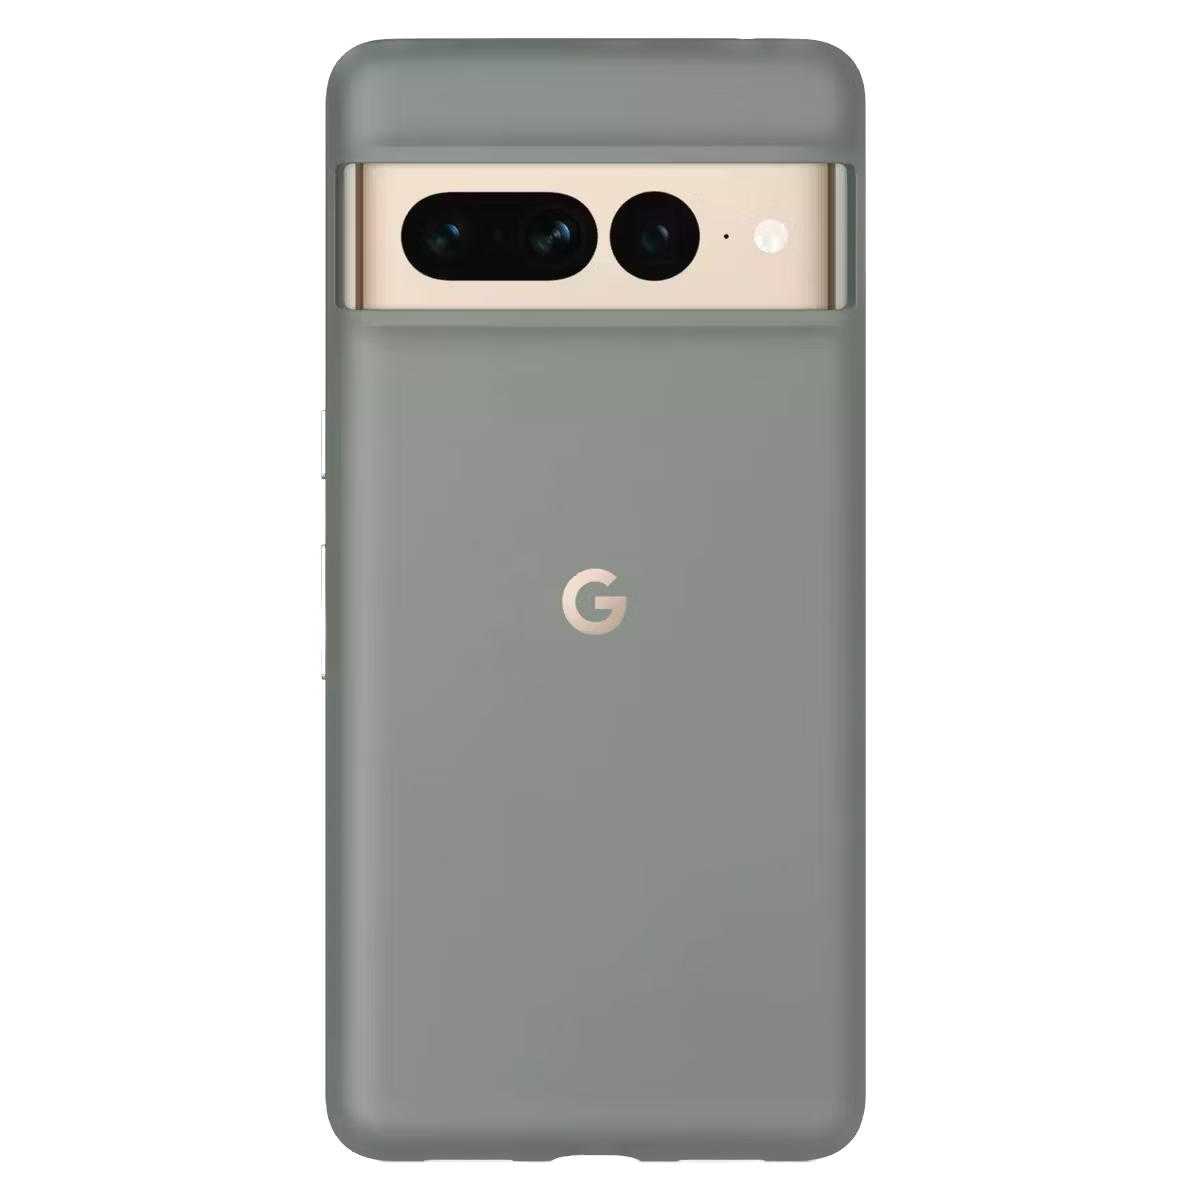 Google-Pixel-7-Pro-renders-on-white-background-qjwefbqwkejf-3 removed